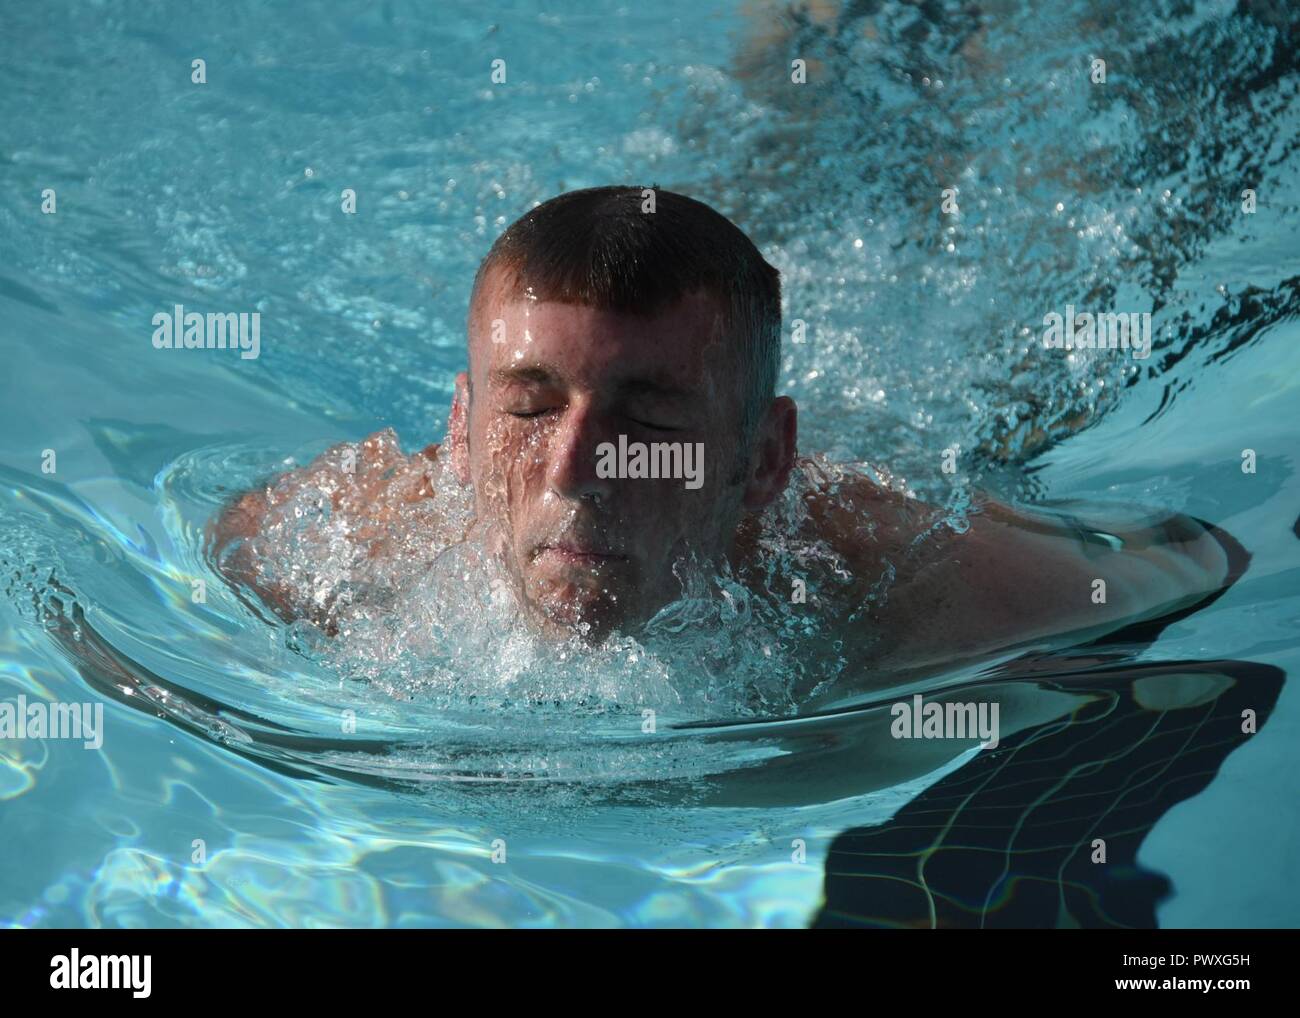 A U.S. Naval Sea Cadet Corps cadet emerges from the water during the swimming portion of a physical readiness test at Tyndall Air Force Base, Fla., June 25, 2017. Cadets must consistently pass a rigorous physical test that includes a timed 500 meter swim using only a side or breaststroke. The USNSCC program utilized Tyndall’s base resources periodically over the course of two weeks while testing and training its cadets in naval special warfare courses. Stock Photo